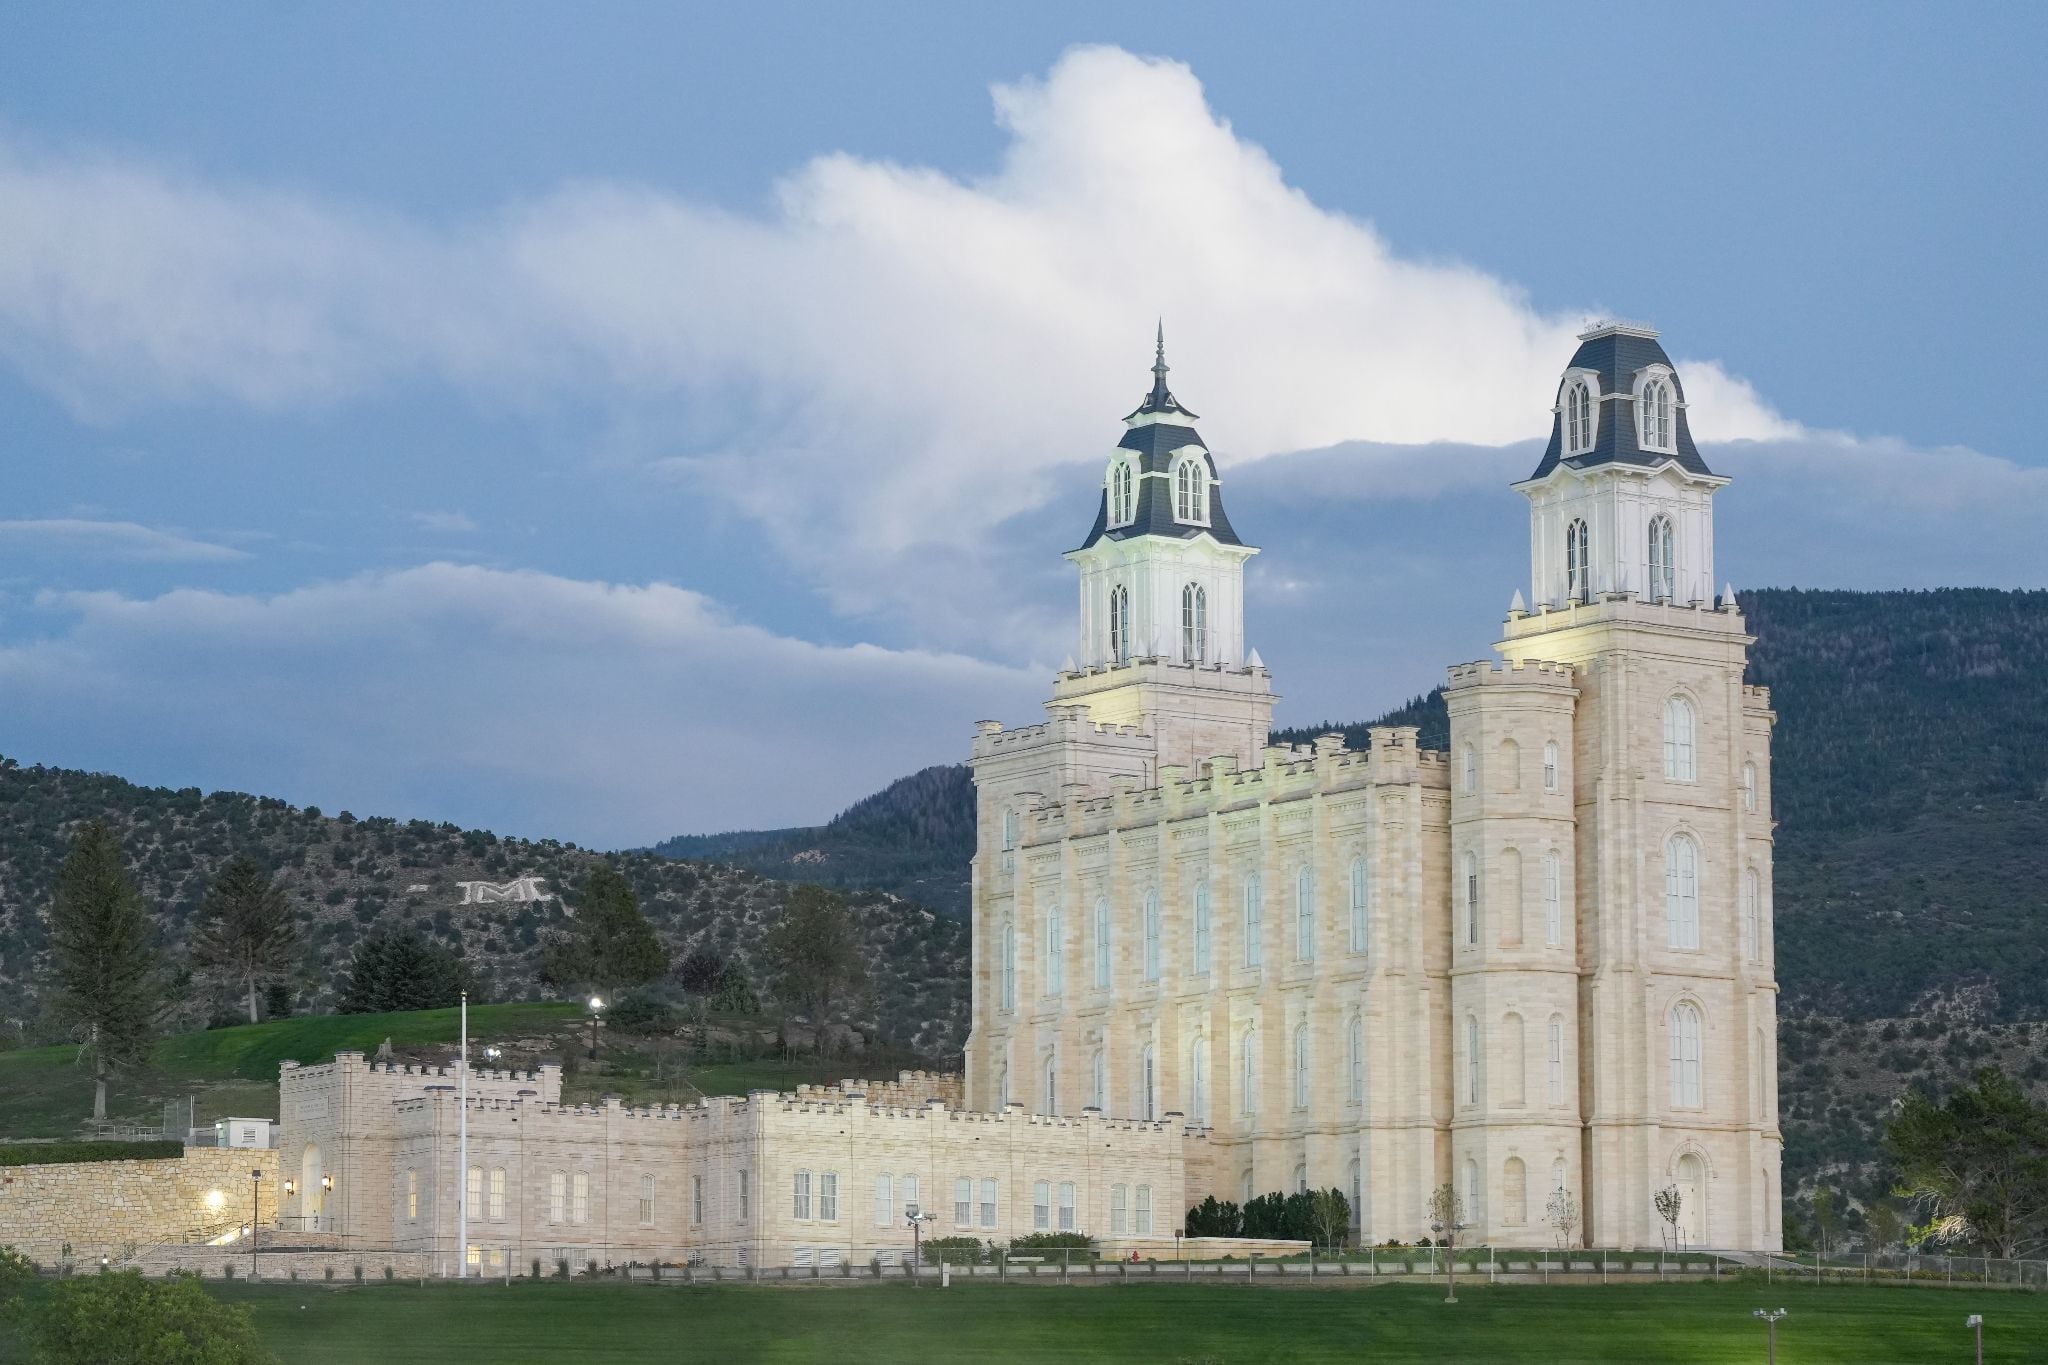 (The Church of Jesus Christ of Latter-day Saints) The Manti Utah Temple is one of 28 existing and planned temples in the Beehive State, home to more than 2 million Latter-day Saints.